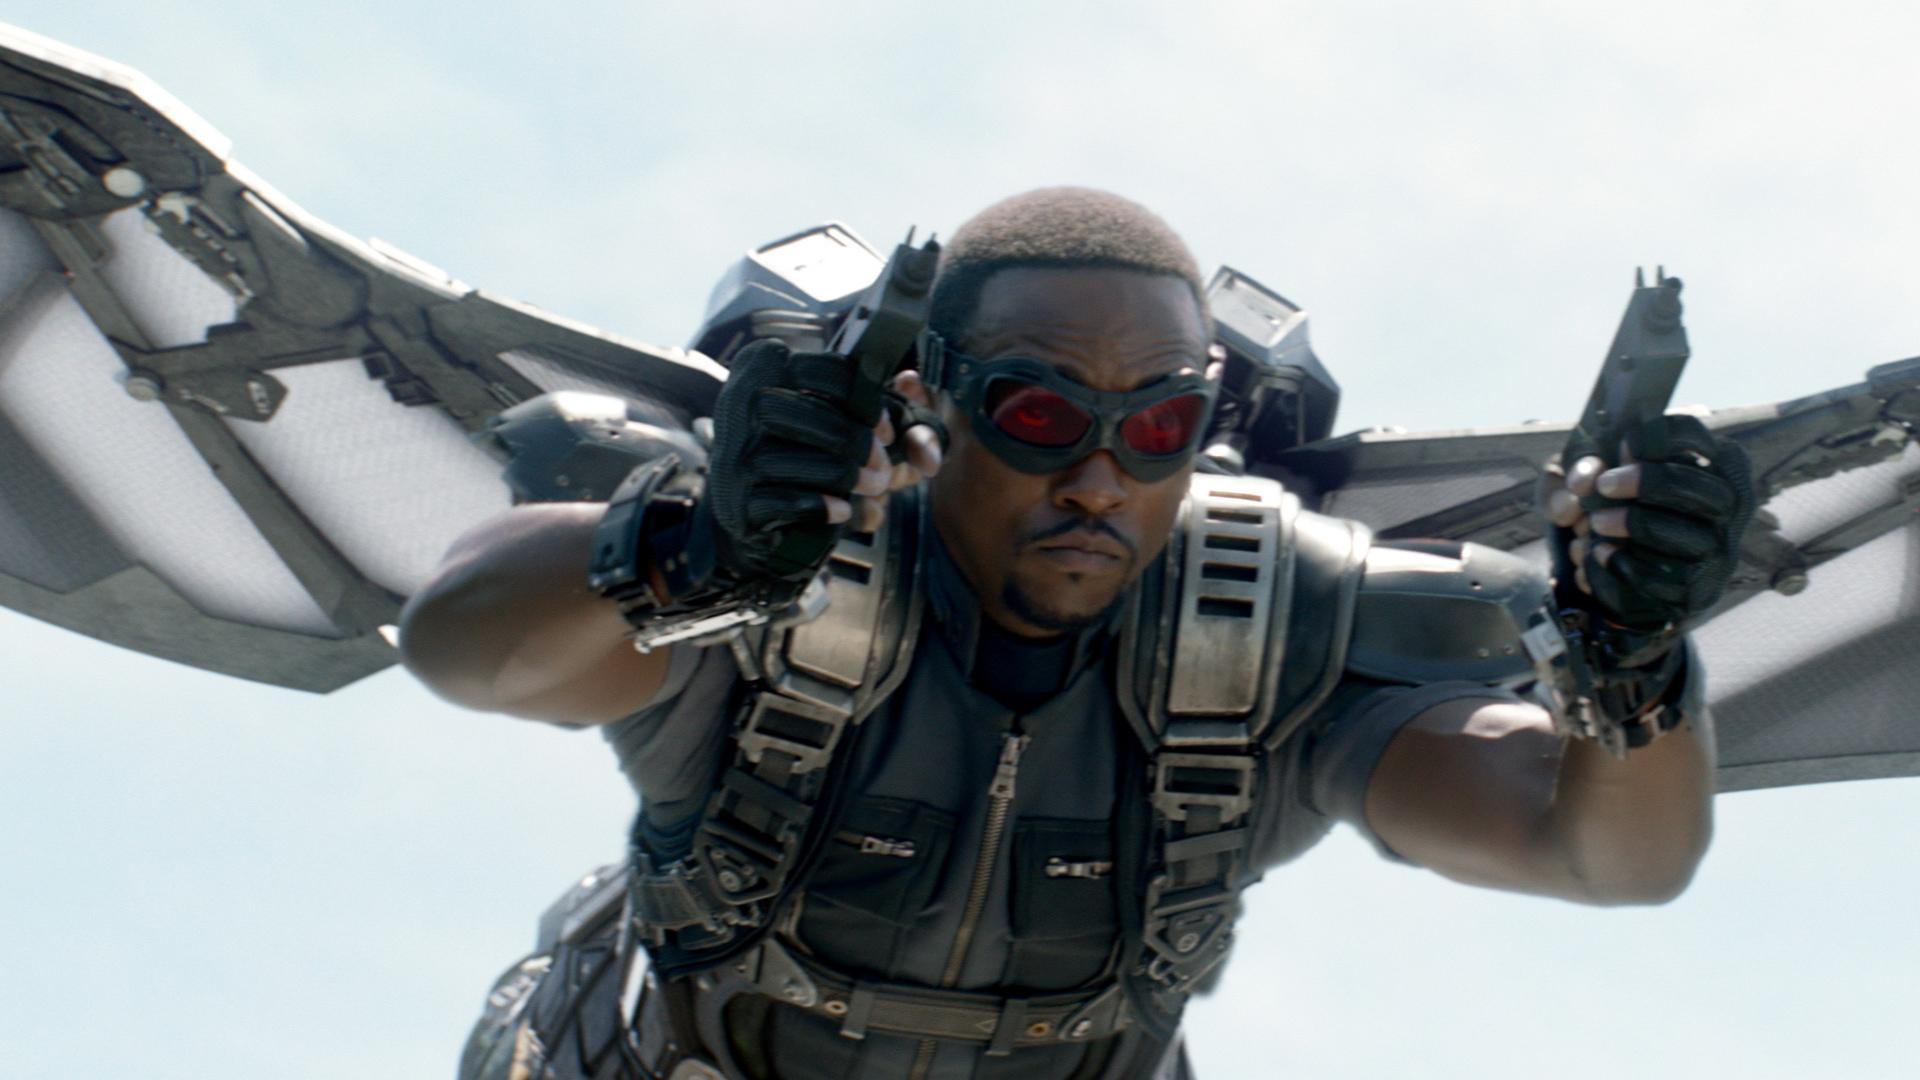 Marvel's Falcon and Winter Soldier teaming up for Disney streaming